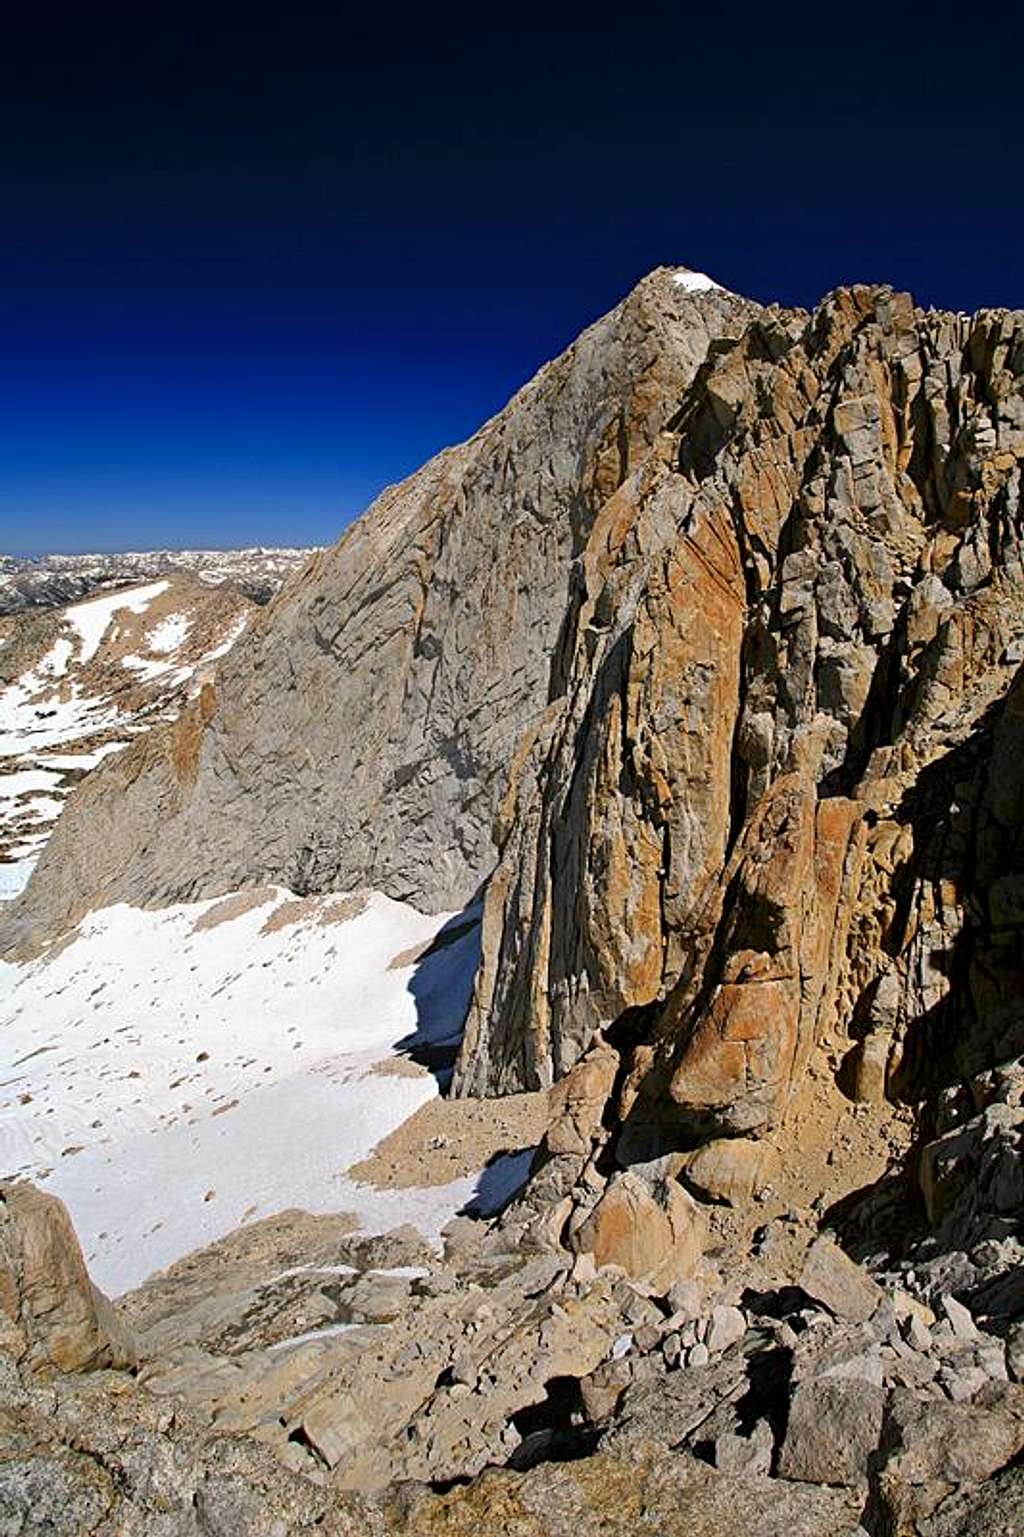 Southwest aspects of Mt. Conness